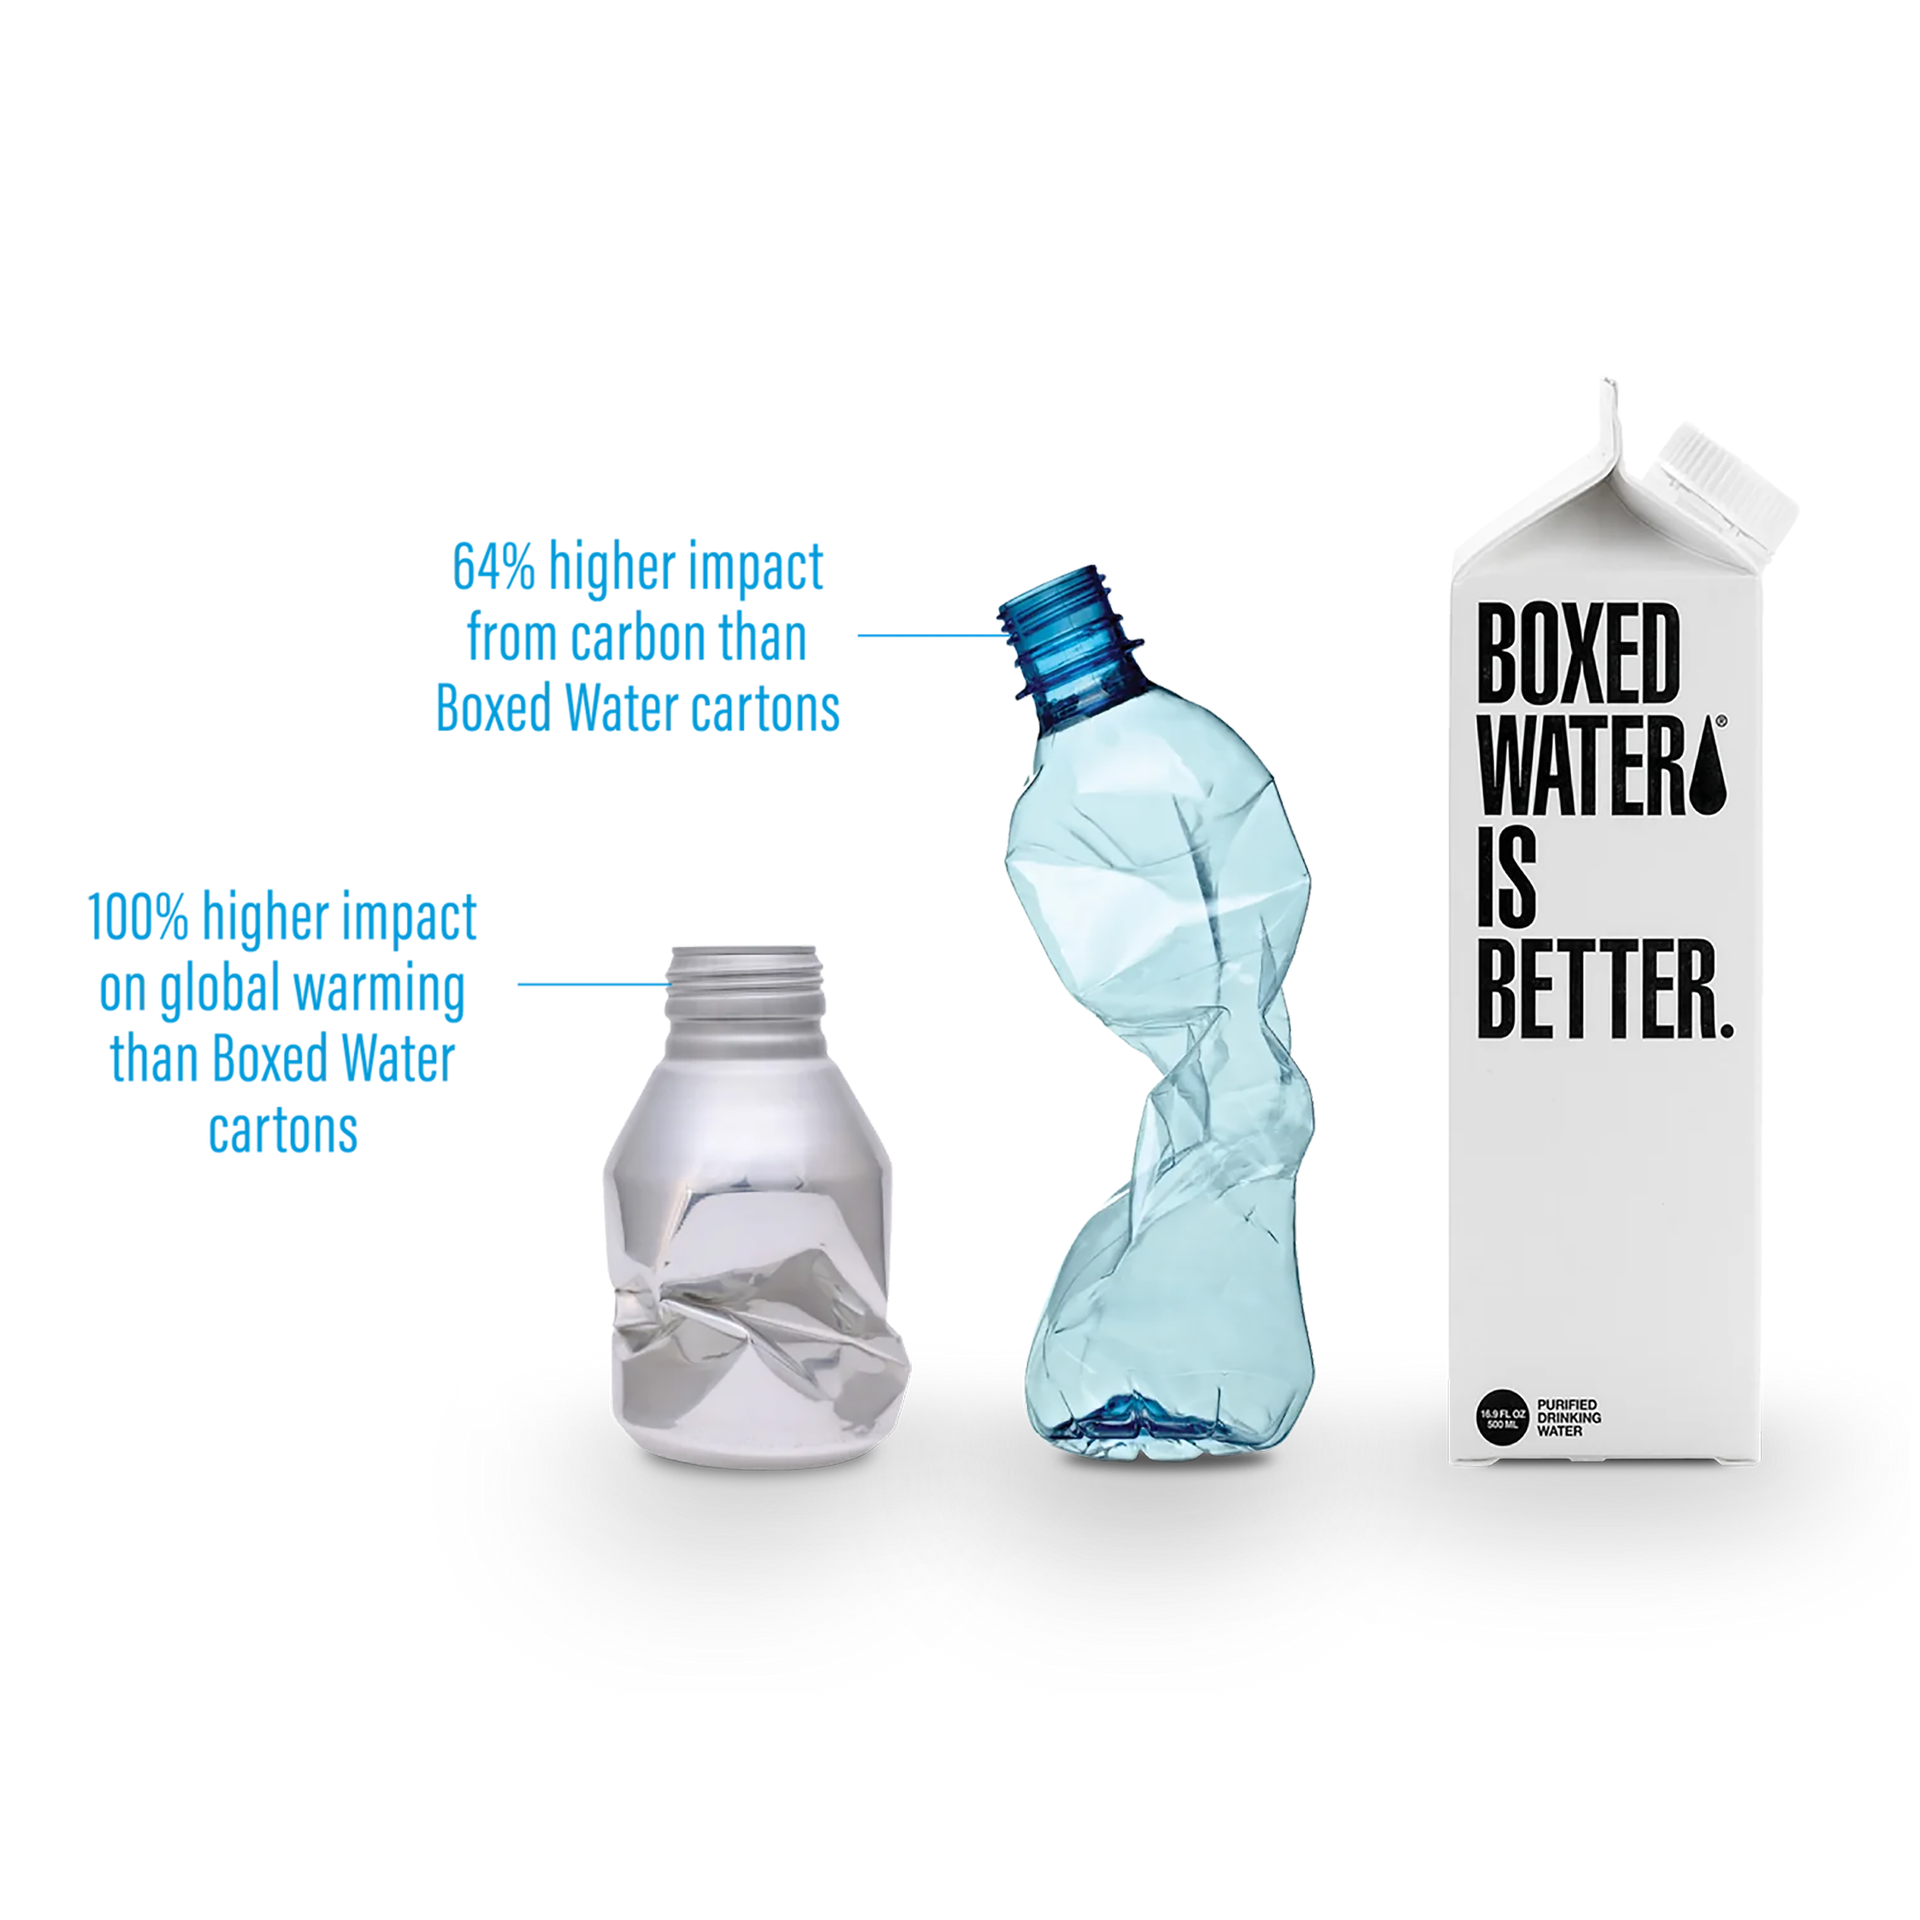 Boxed Water is Better Lifecycle Study Results